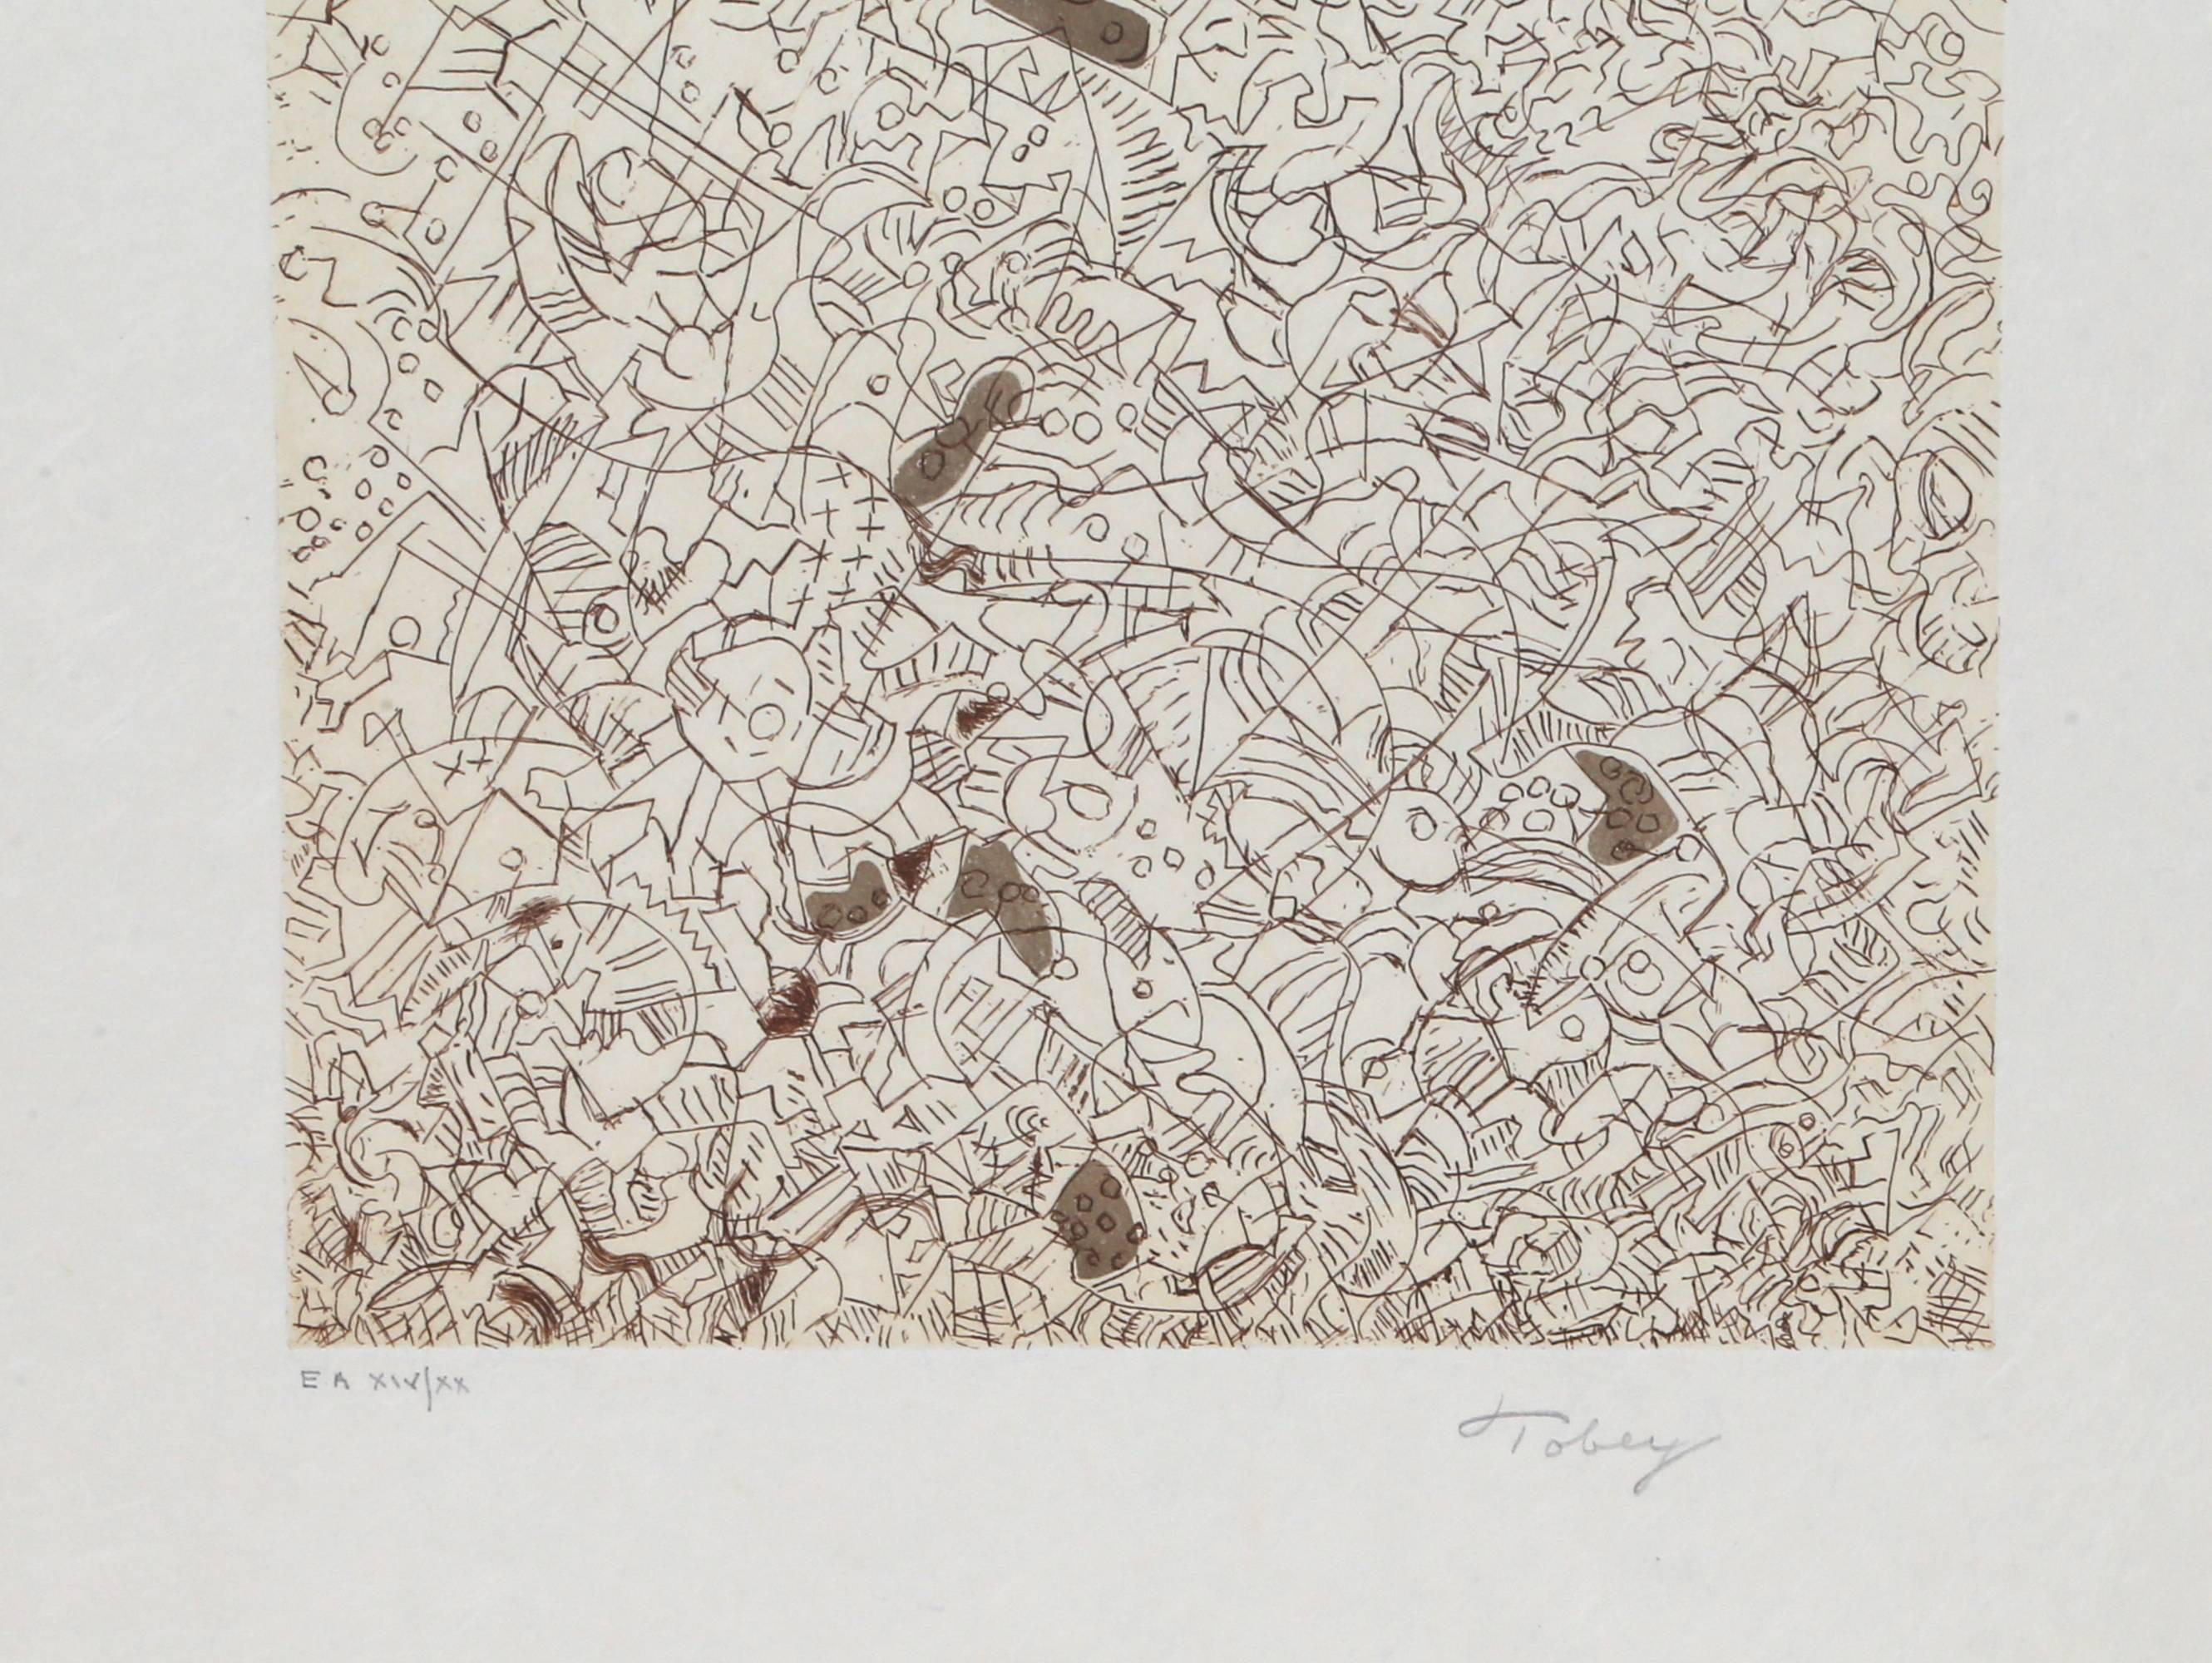 Psaltery, 2nd Form, Abstract Expressionist Etching by Mark Tobey 1